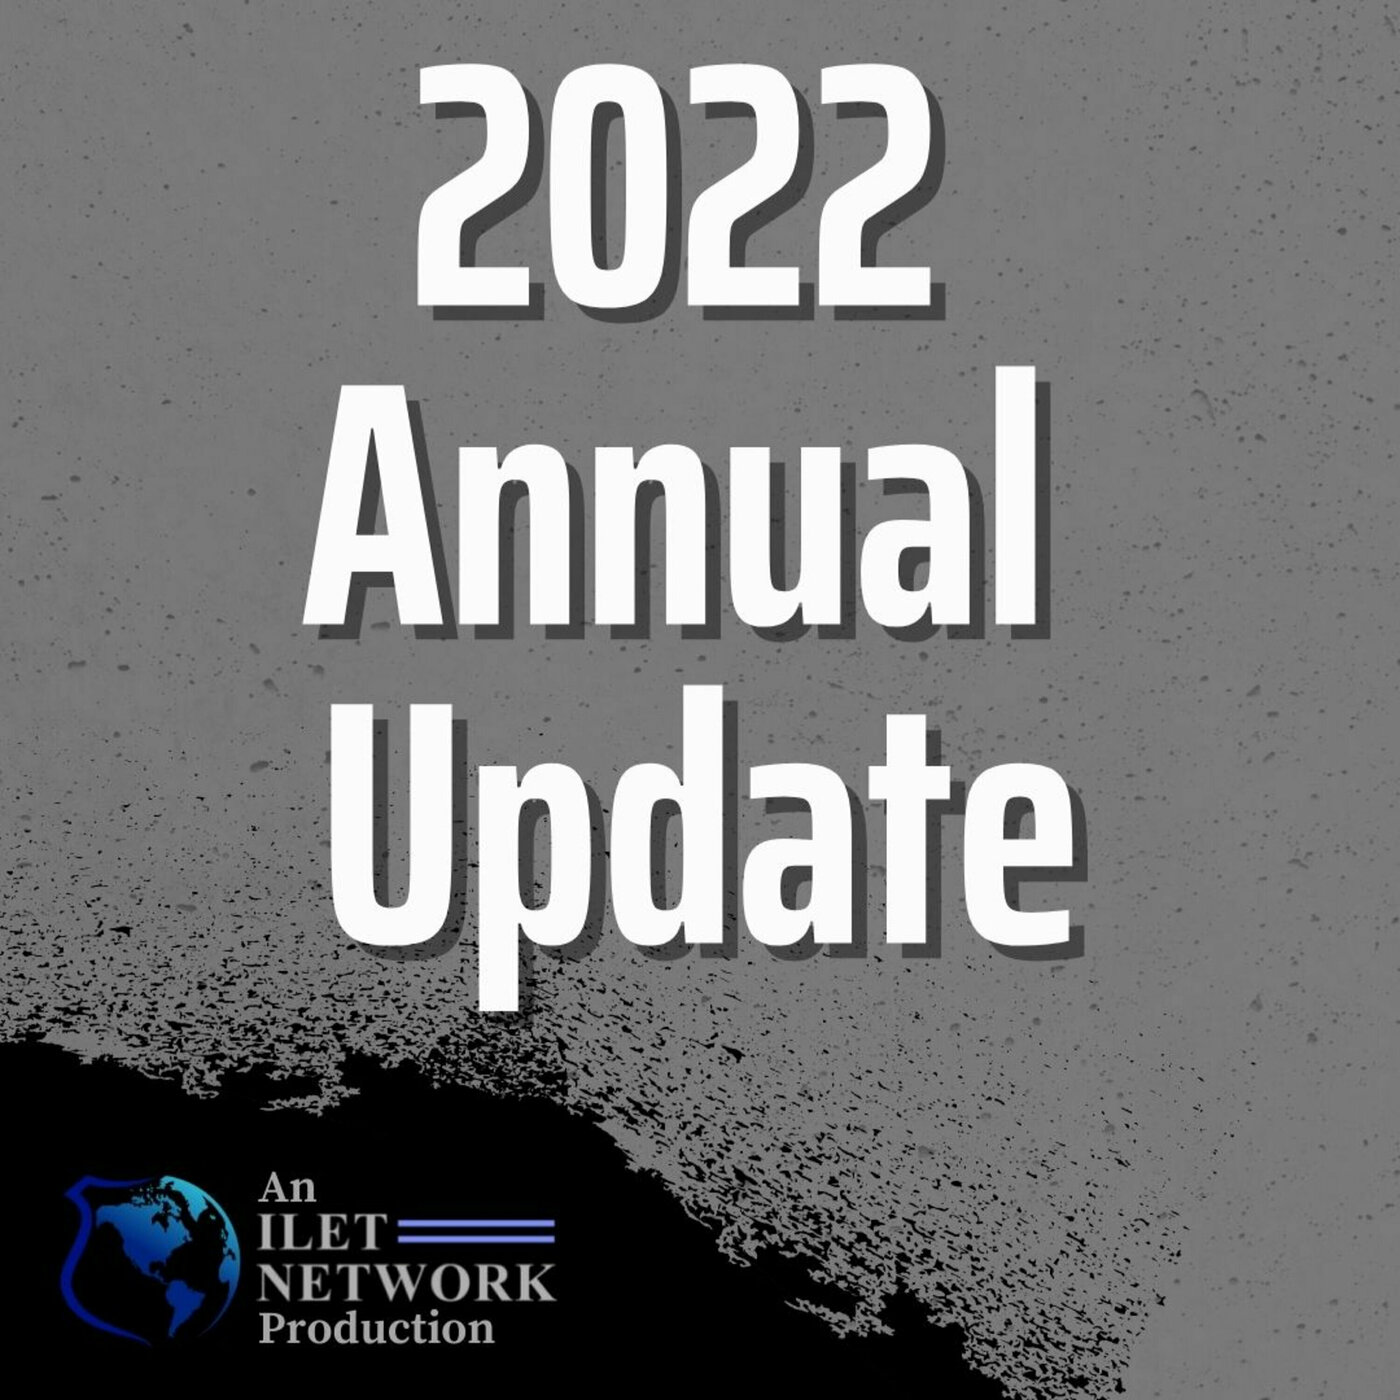 2022 Annual Update - Exclusive ILET Network Offer